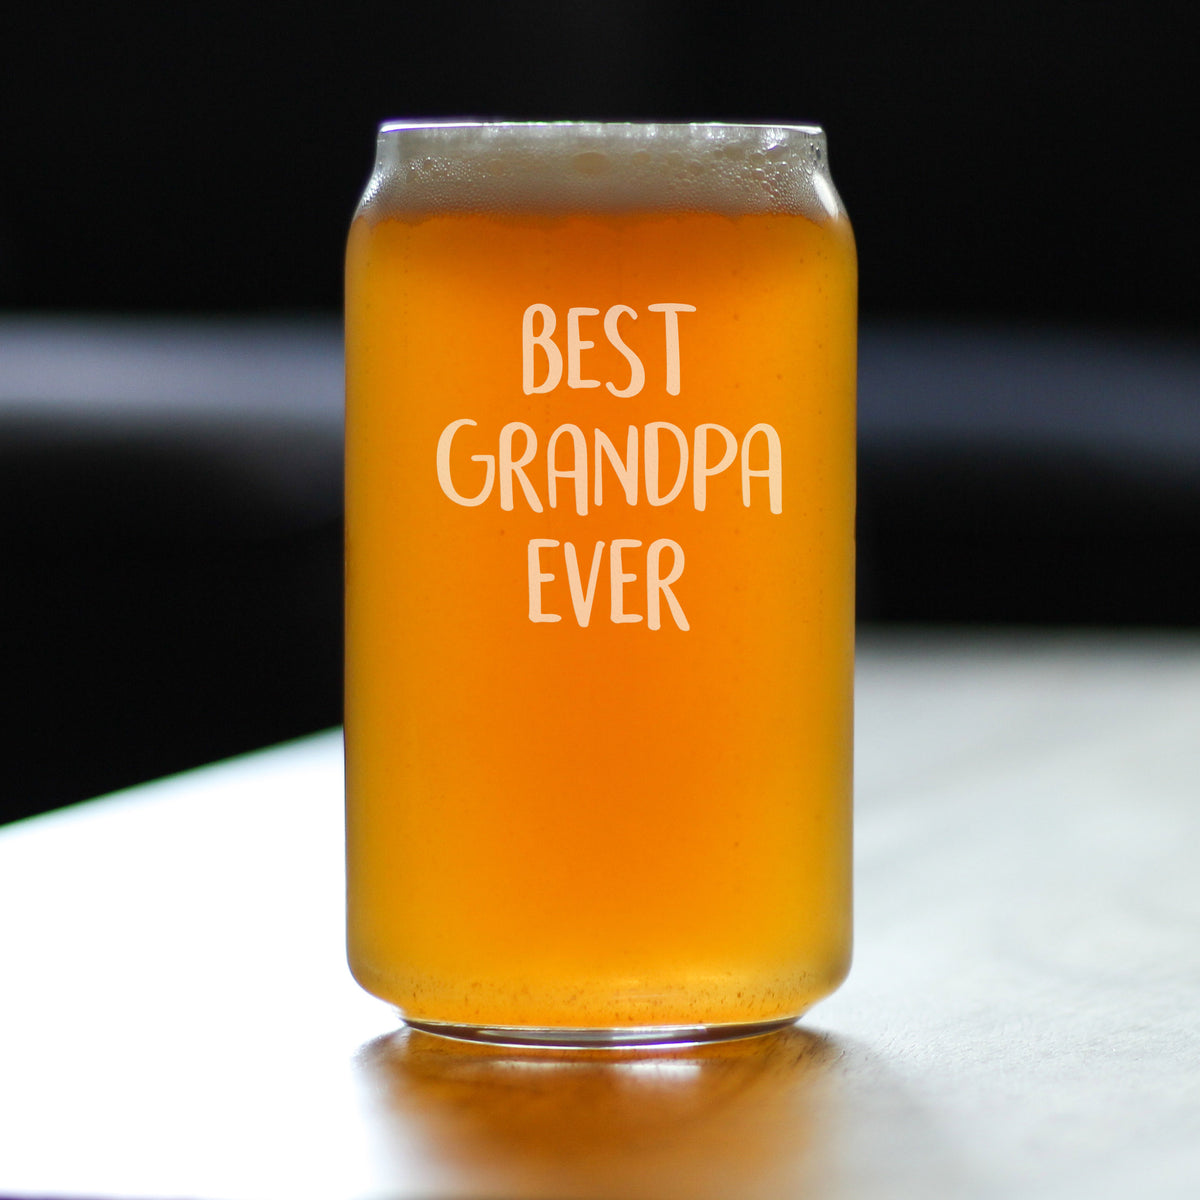 Best Grandpa Ever - Beer Can Pint Glass - Fun Drinking Gifts for Grandfathers - Cute Glassware for Grandparents - 16 oz